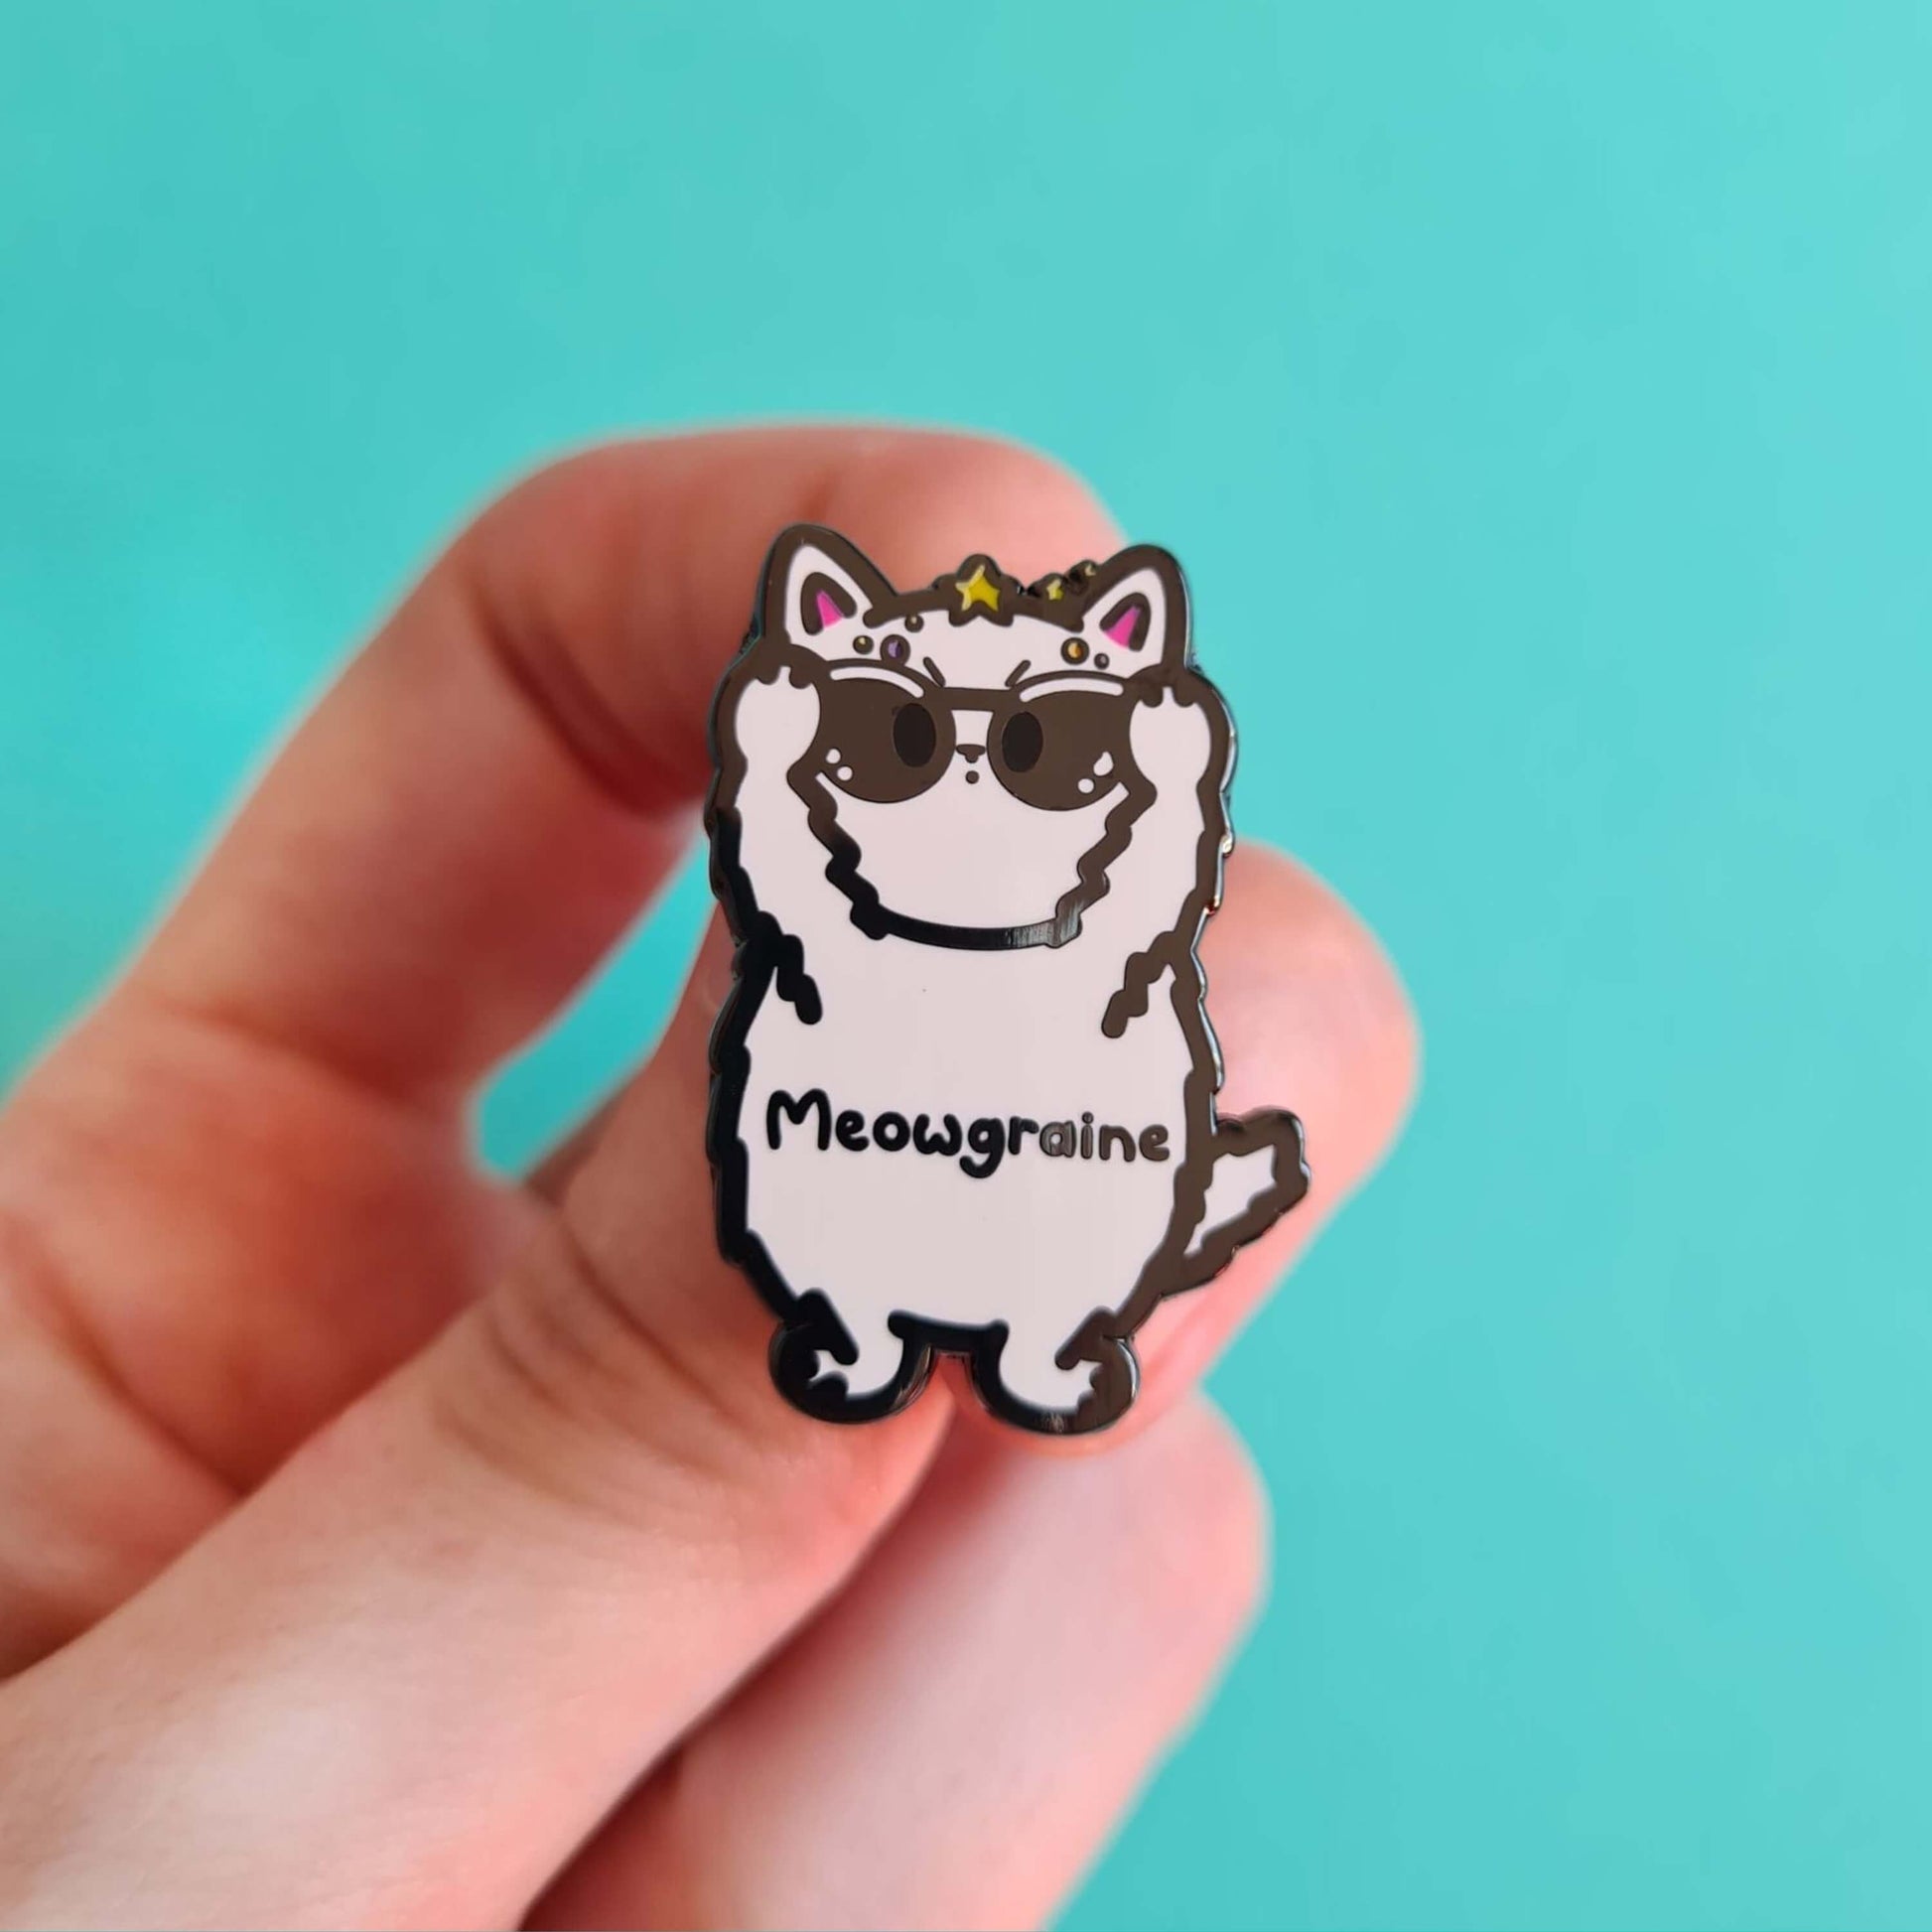 The Meowgraine Cat Enamel Pin - Migraine held over a blue background. A white stressed cat clutching a pair of black sunglasses to its eyes with multicoloured spots and stars over its head, across its middle reads 'meowgraine'. The hand drawn design is raising awareness for migraines and headaches.